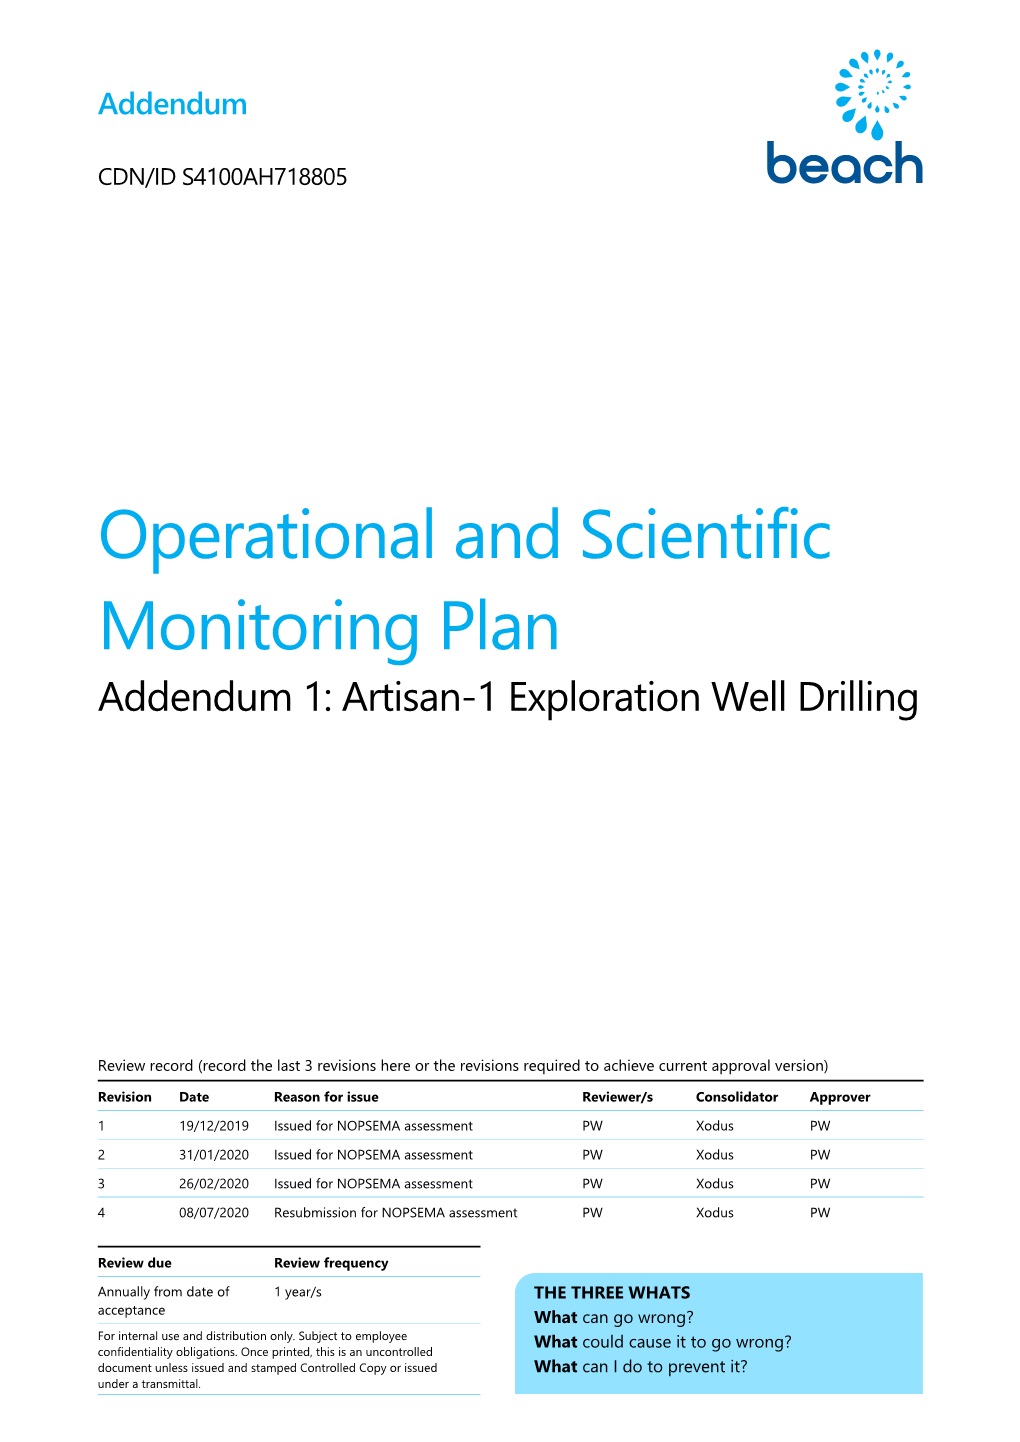 Operational and Scientific Monitoring Plan Addendum 1: Artisan-1 Exploration Well Drilling